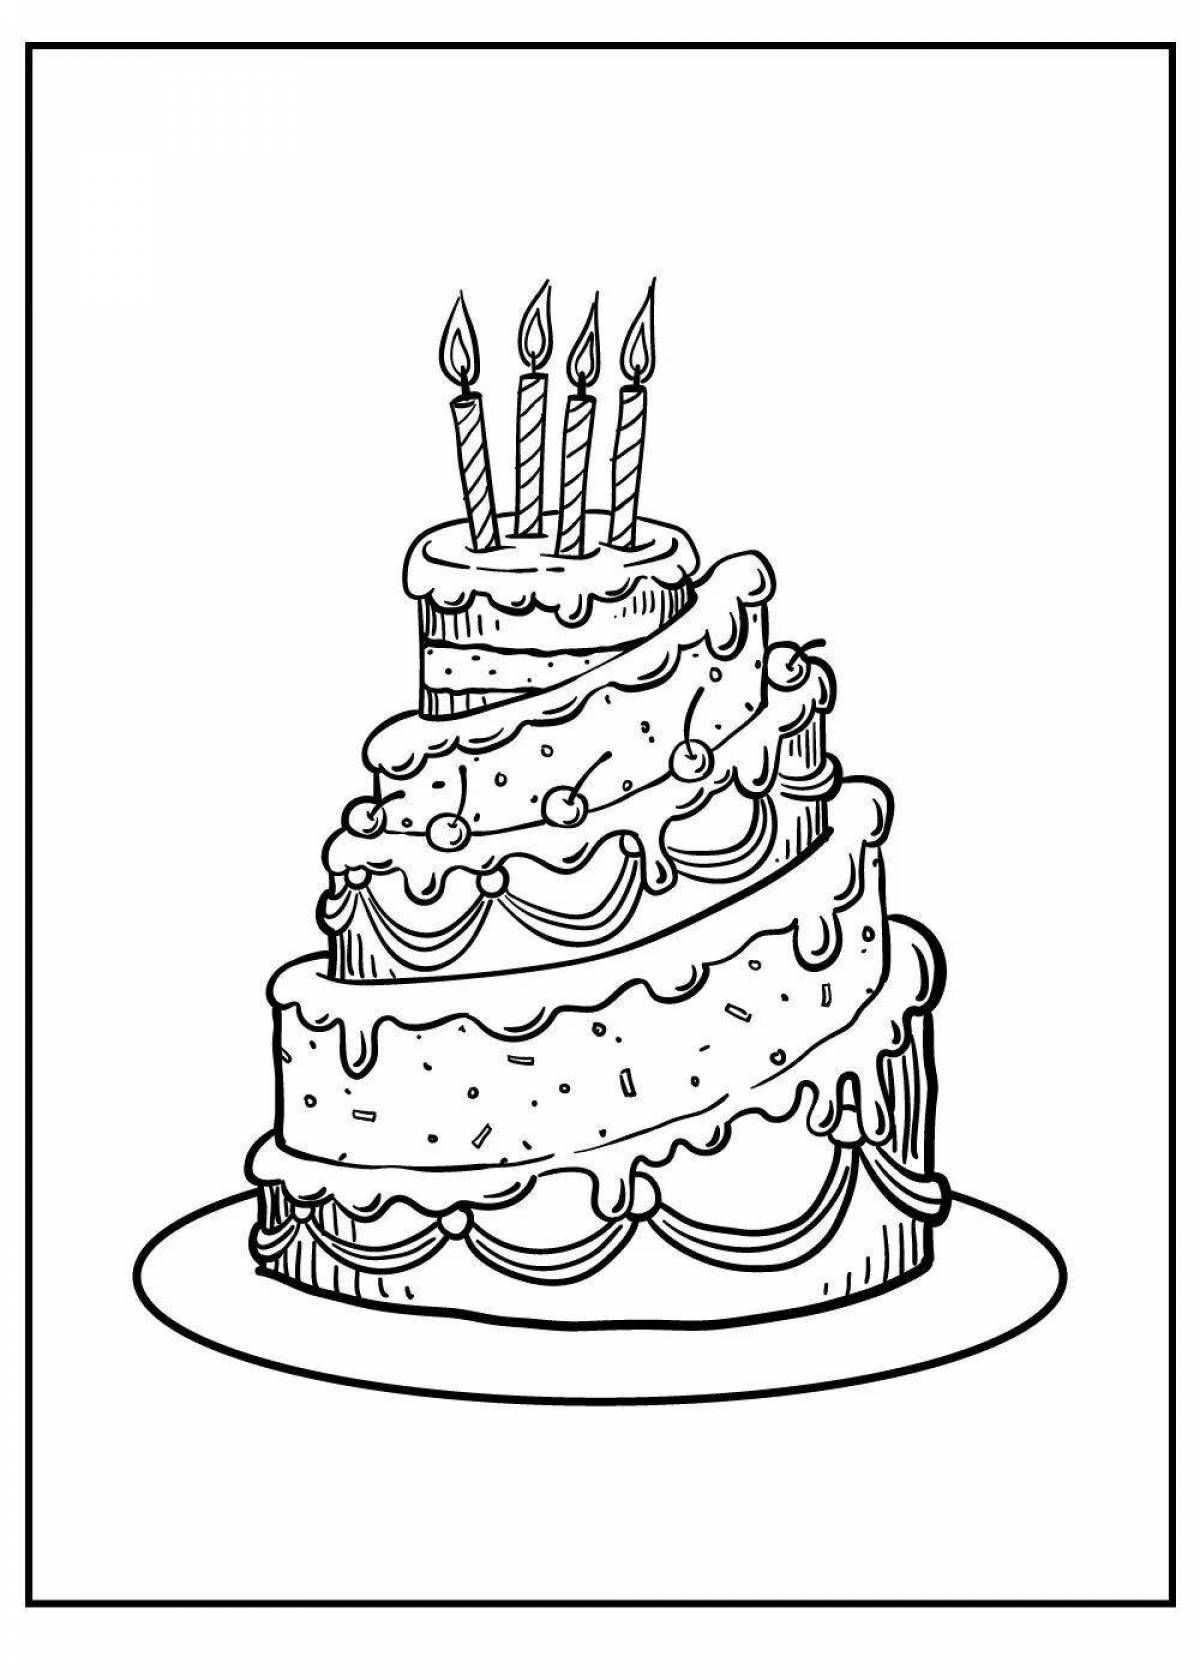 Colorful birthday cake coloring book